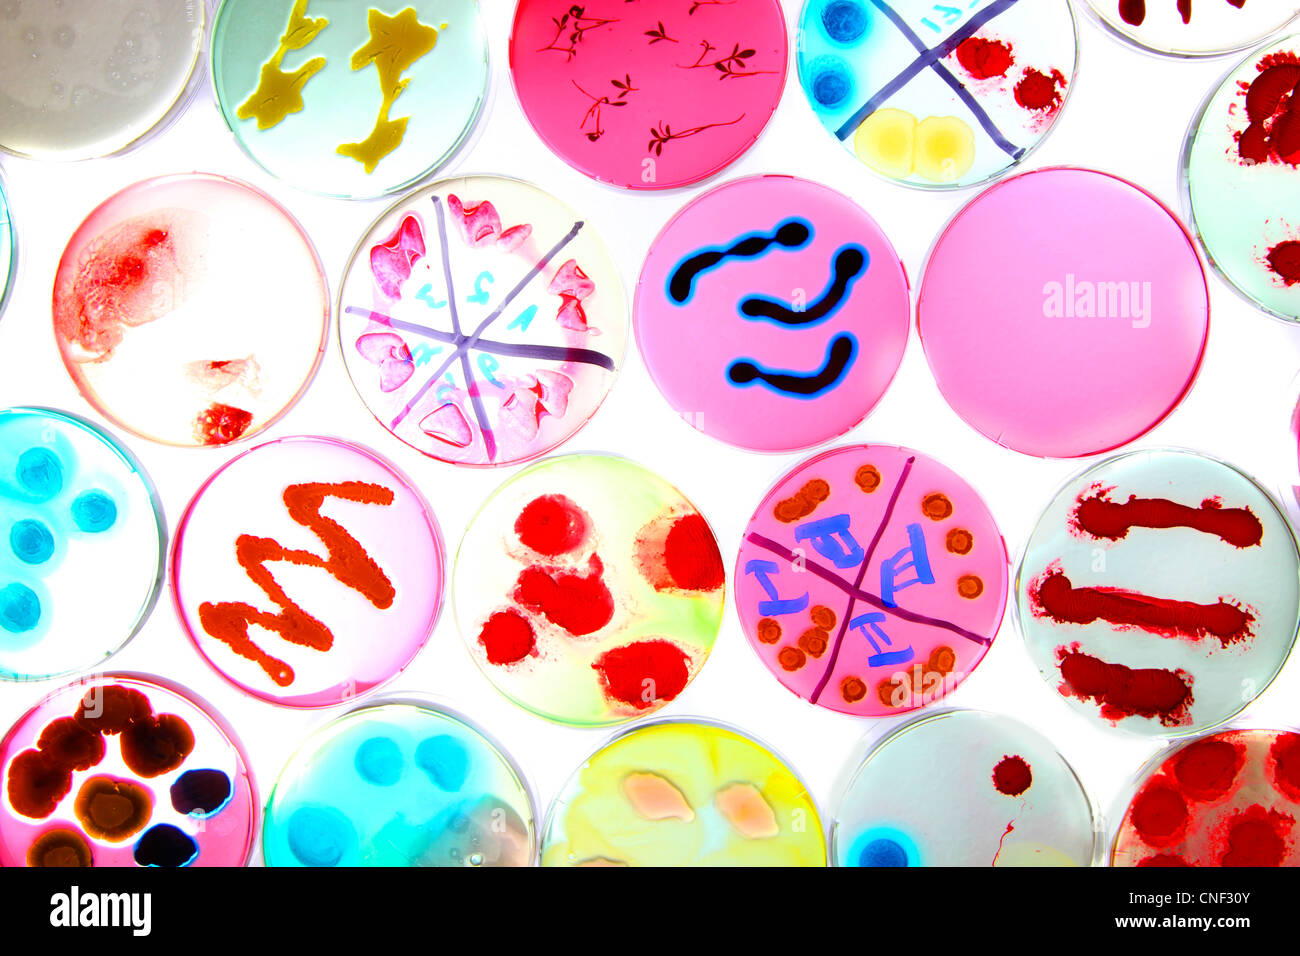 Laboratory, biological, chemical. Analysis of bacterial cultures of bacteria growing in petri dishes. Stock Photo